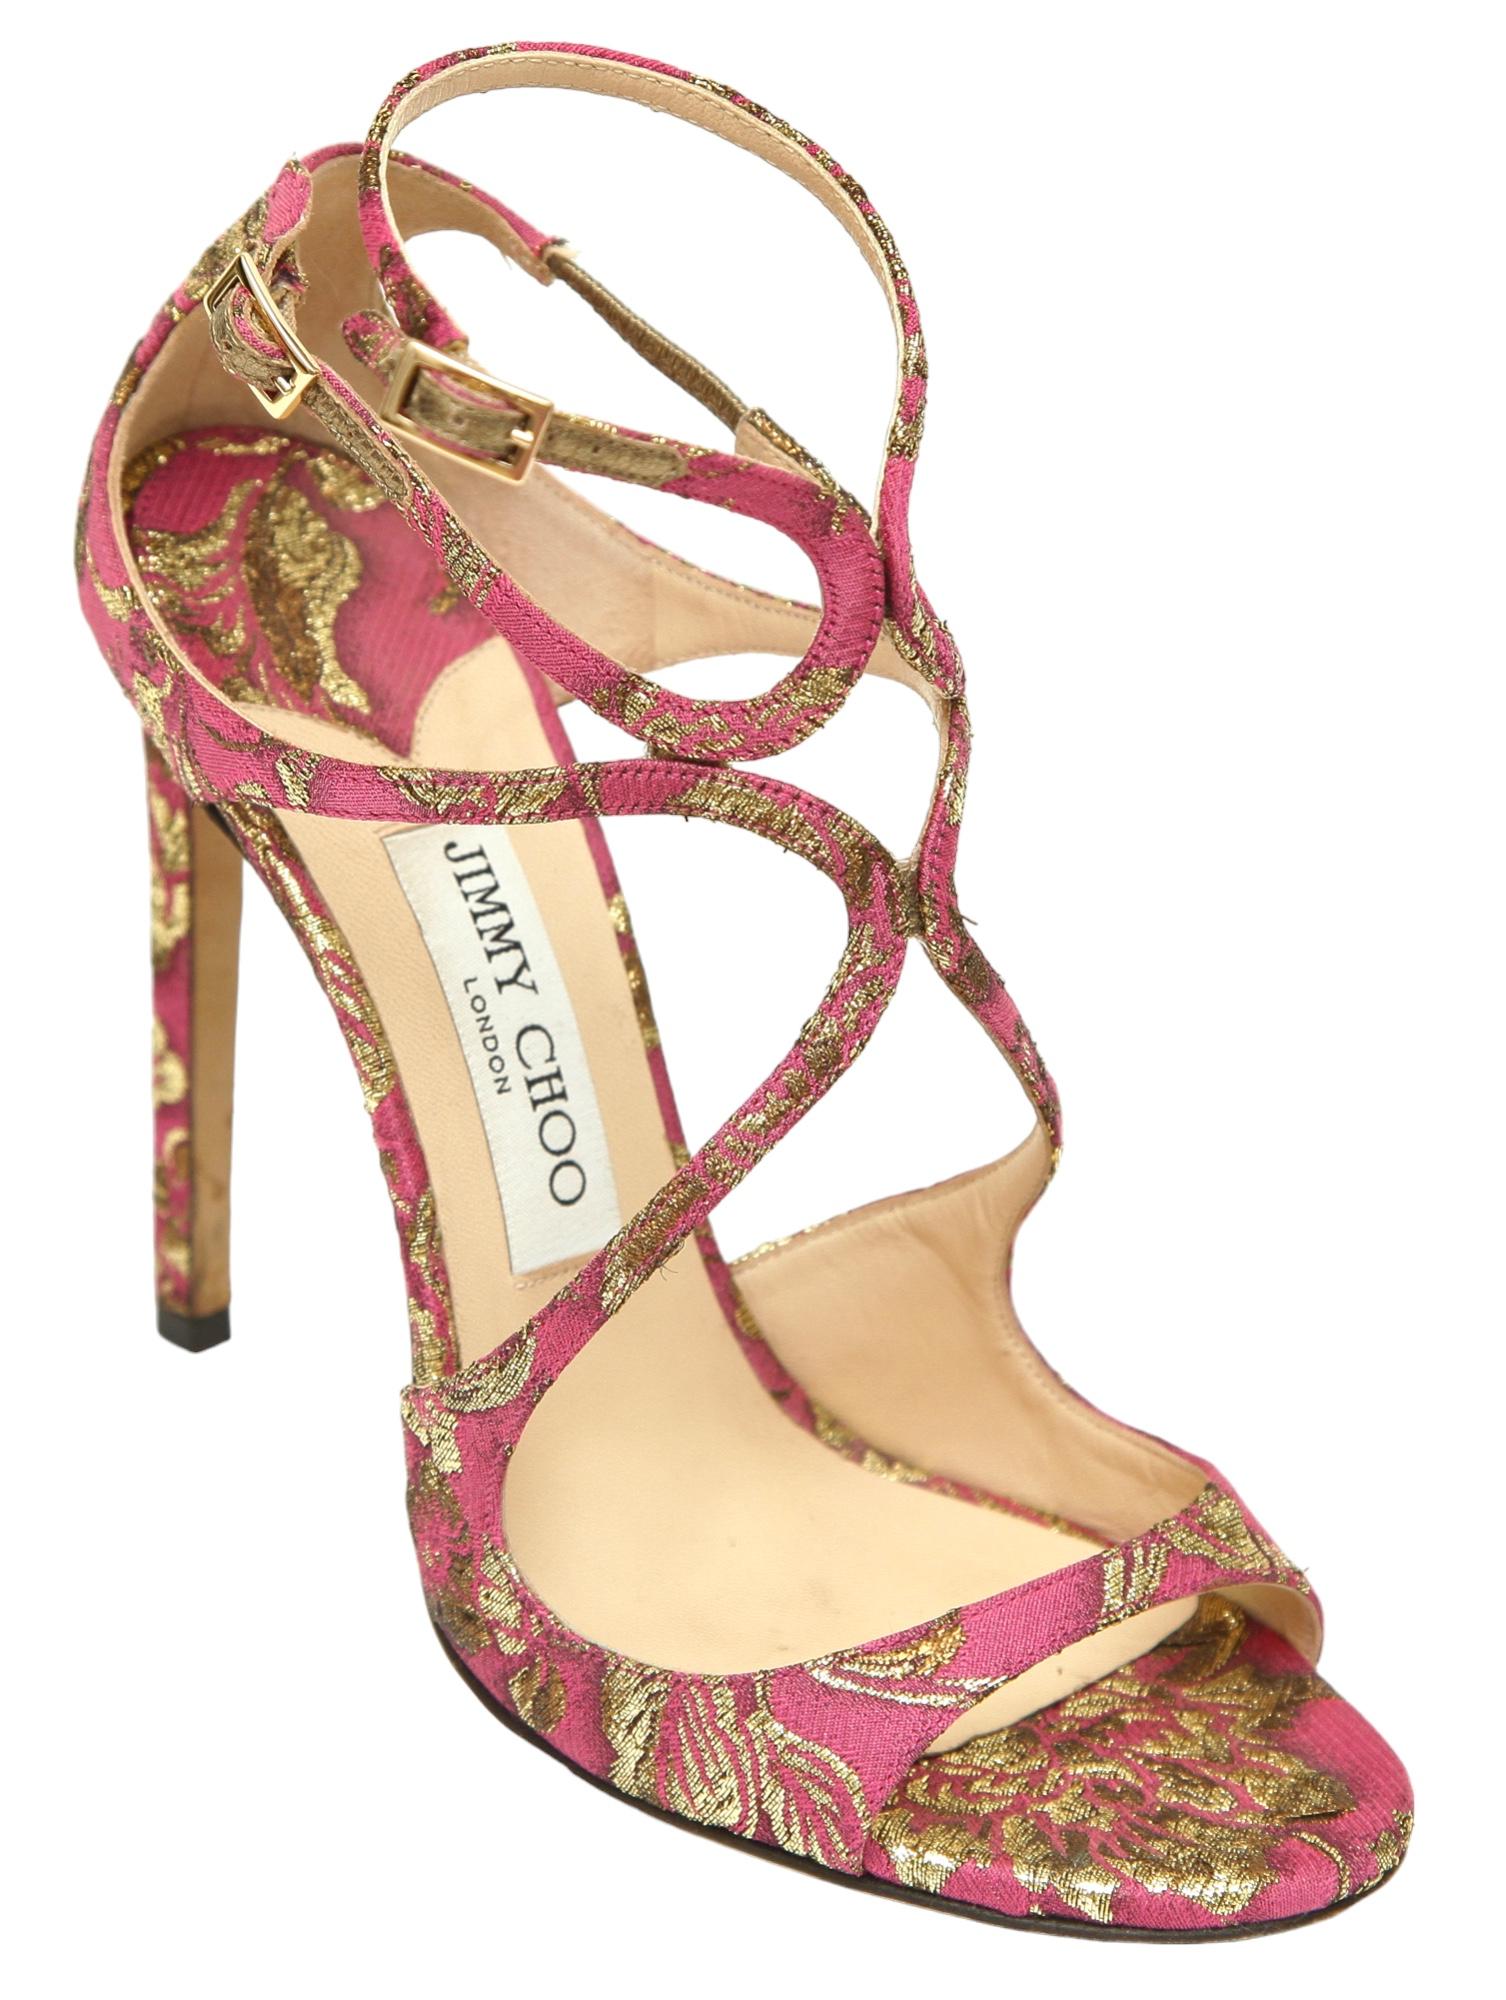 JIMMY CHOO Sandals Brocade Pink Gold Metallic LANCER Heels Leather Strappy 38 In Good Condition For Sale In Hollywood, FL